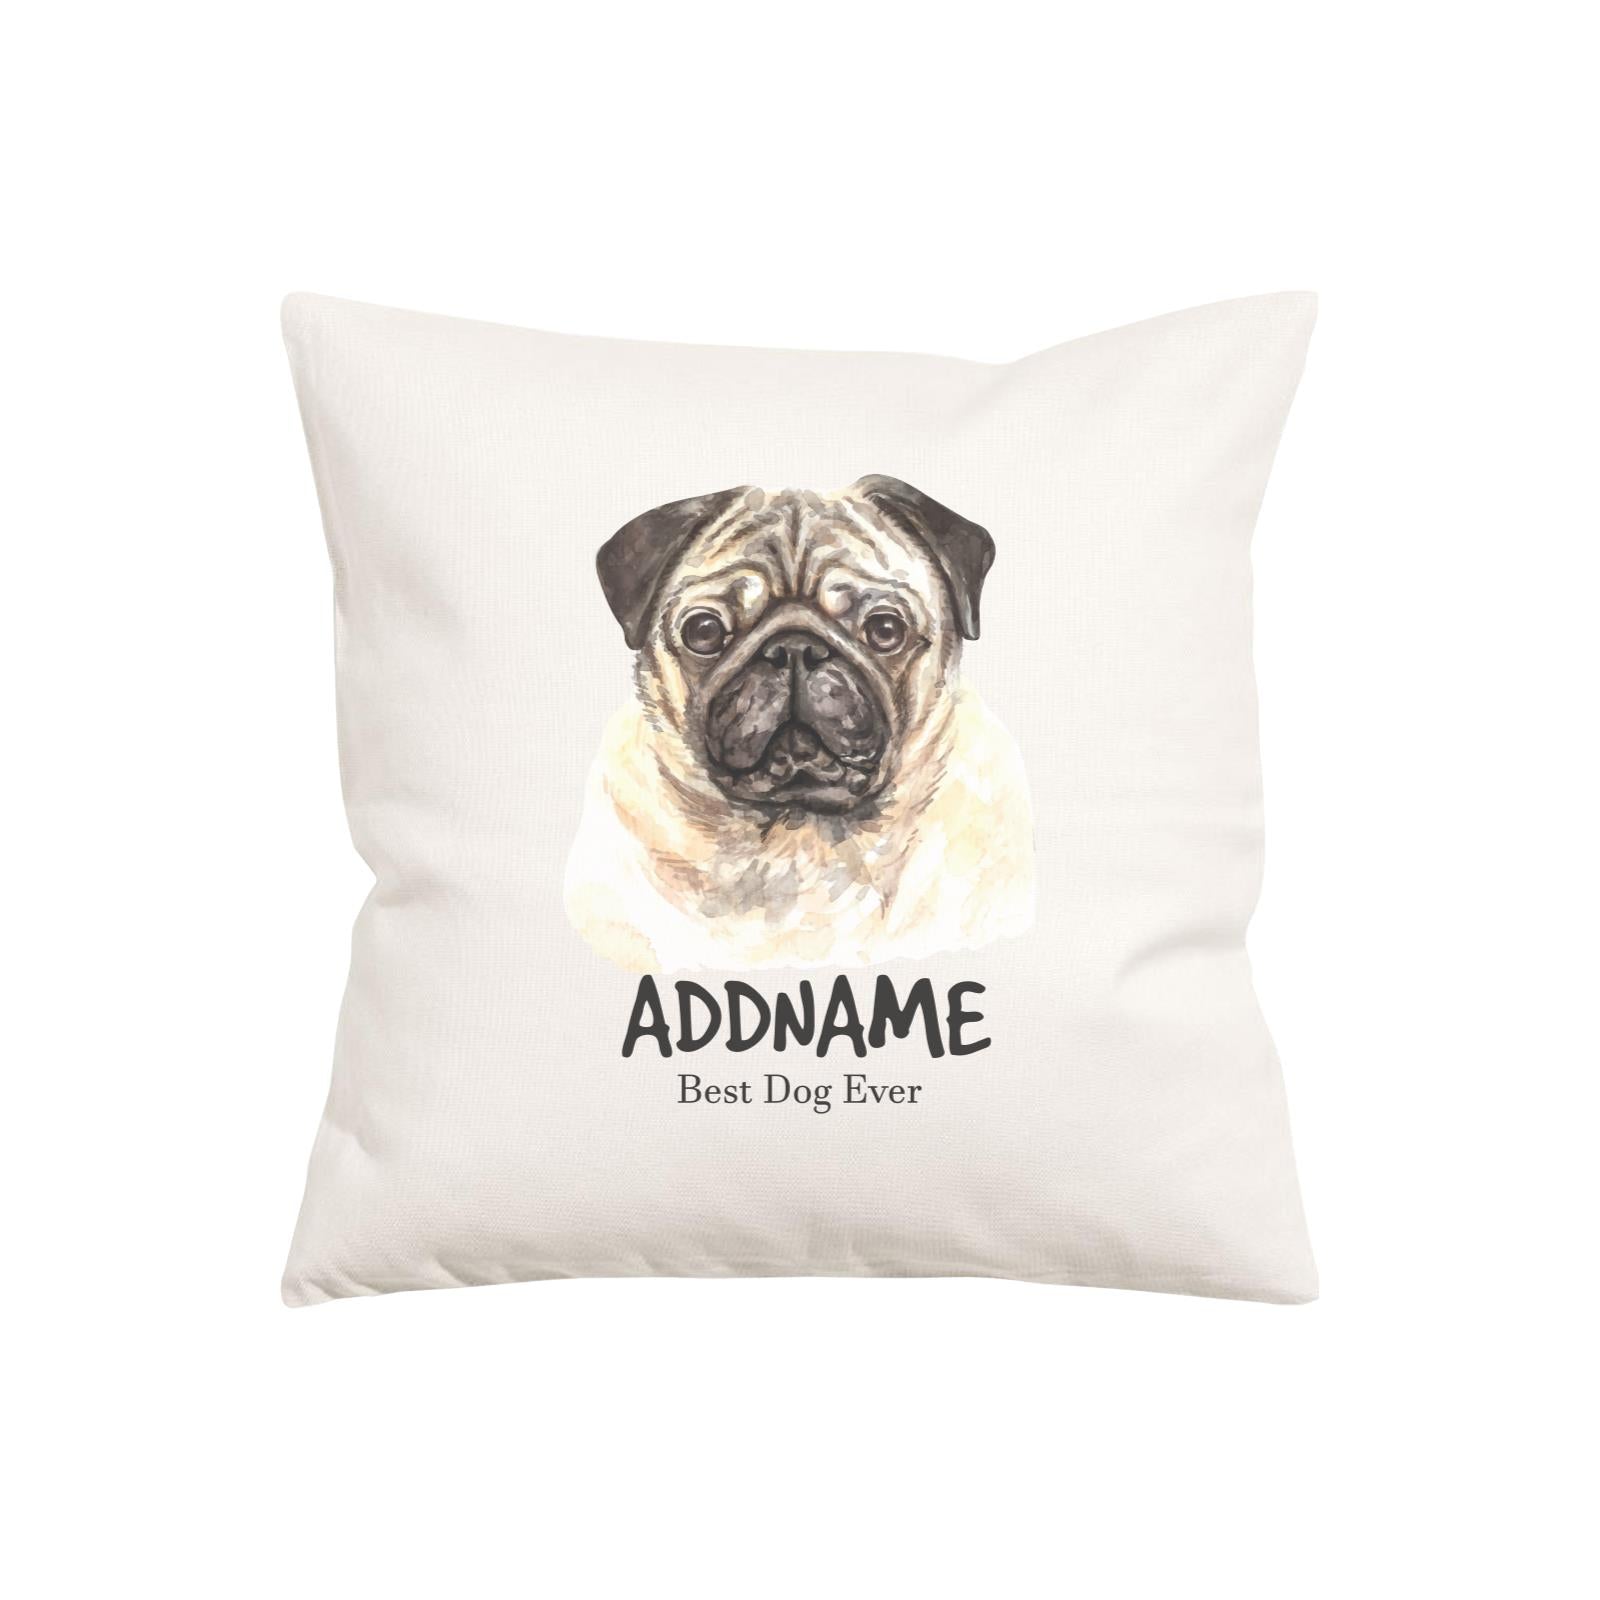 Watercolor Dog Series Pug Best Dog Ever Addname Pillow Cushion